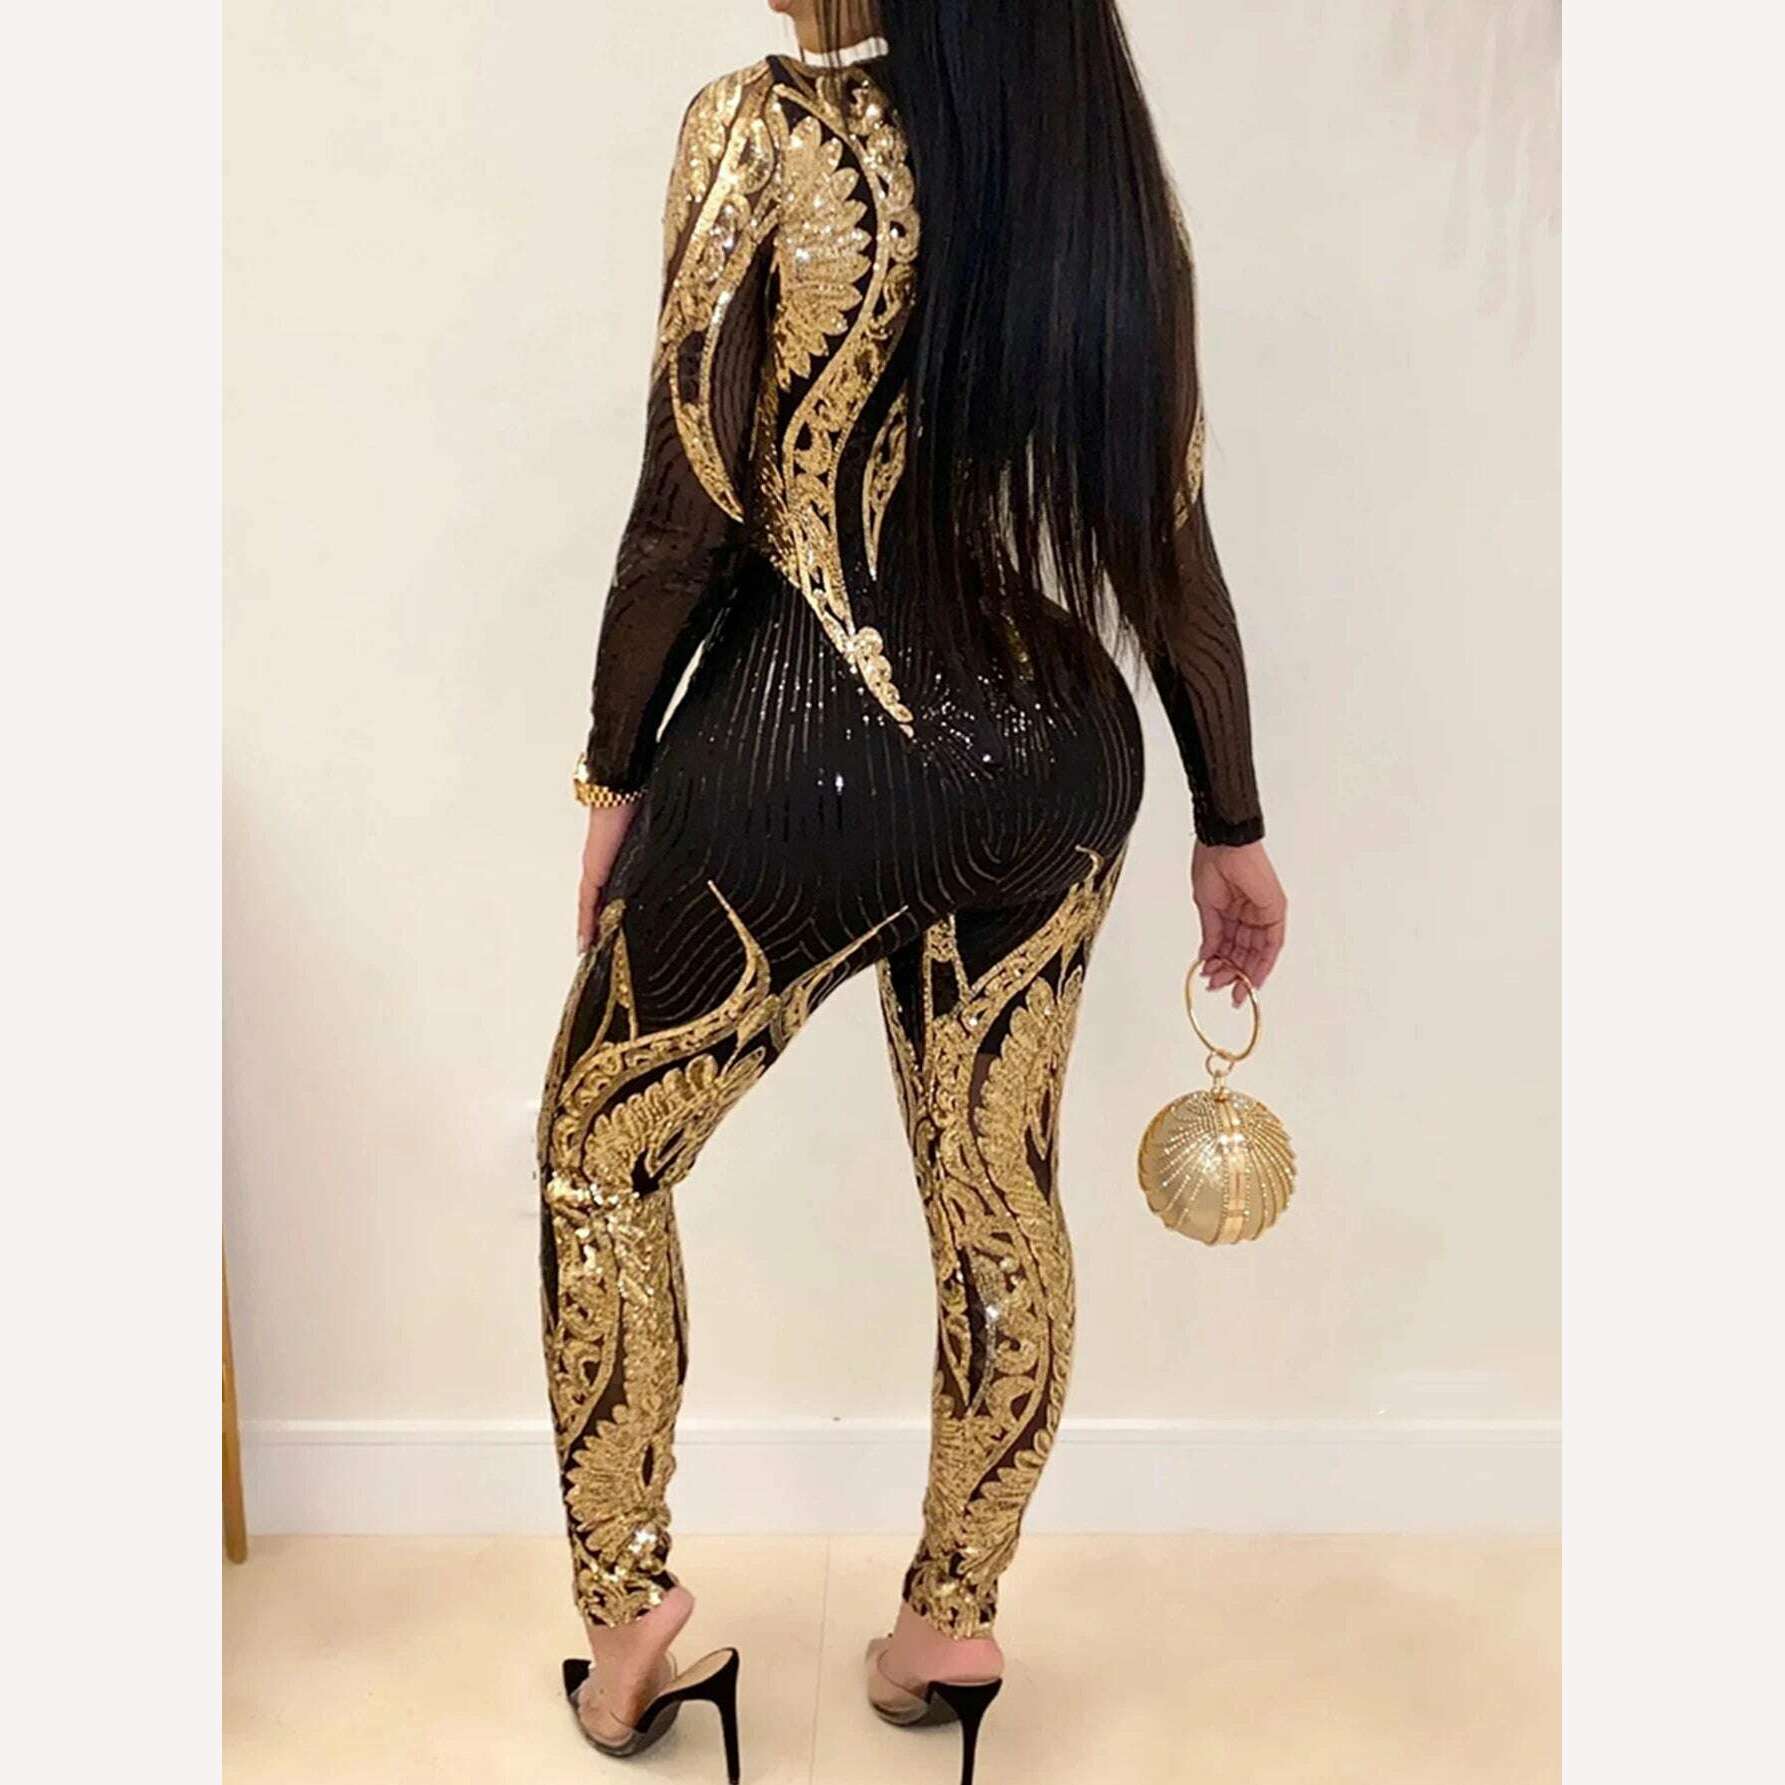 KIMLUD, Sexy Long sleeve Sequin bodycon jumpsuit women body bodysuit one piece birthday party nightclub outfits womens jumpsuits overall, KIMLUD Womens Clothes